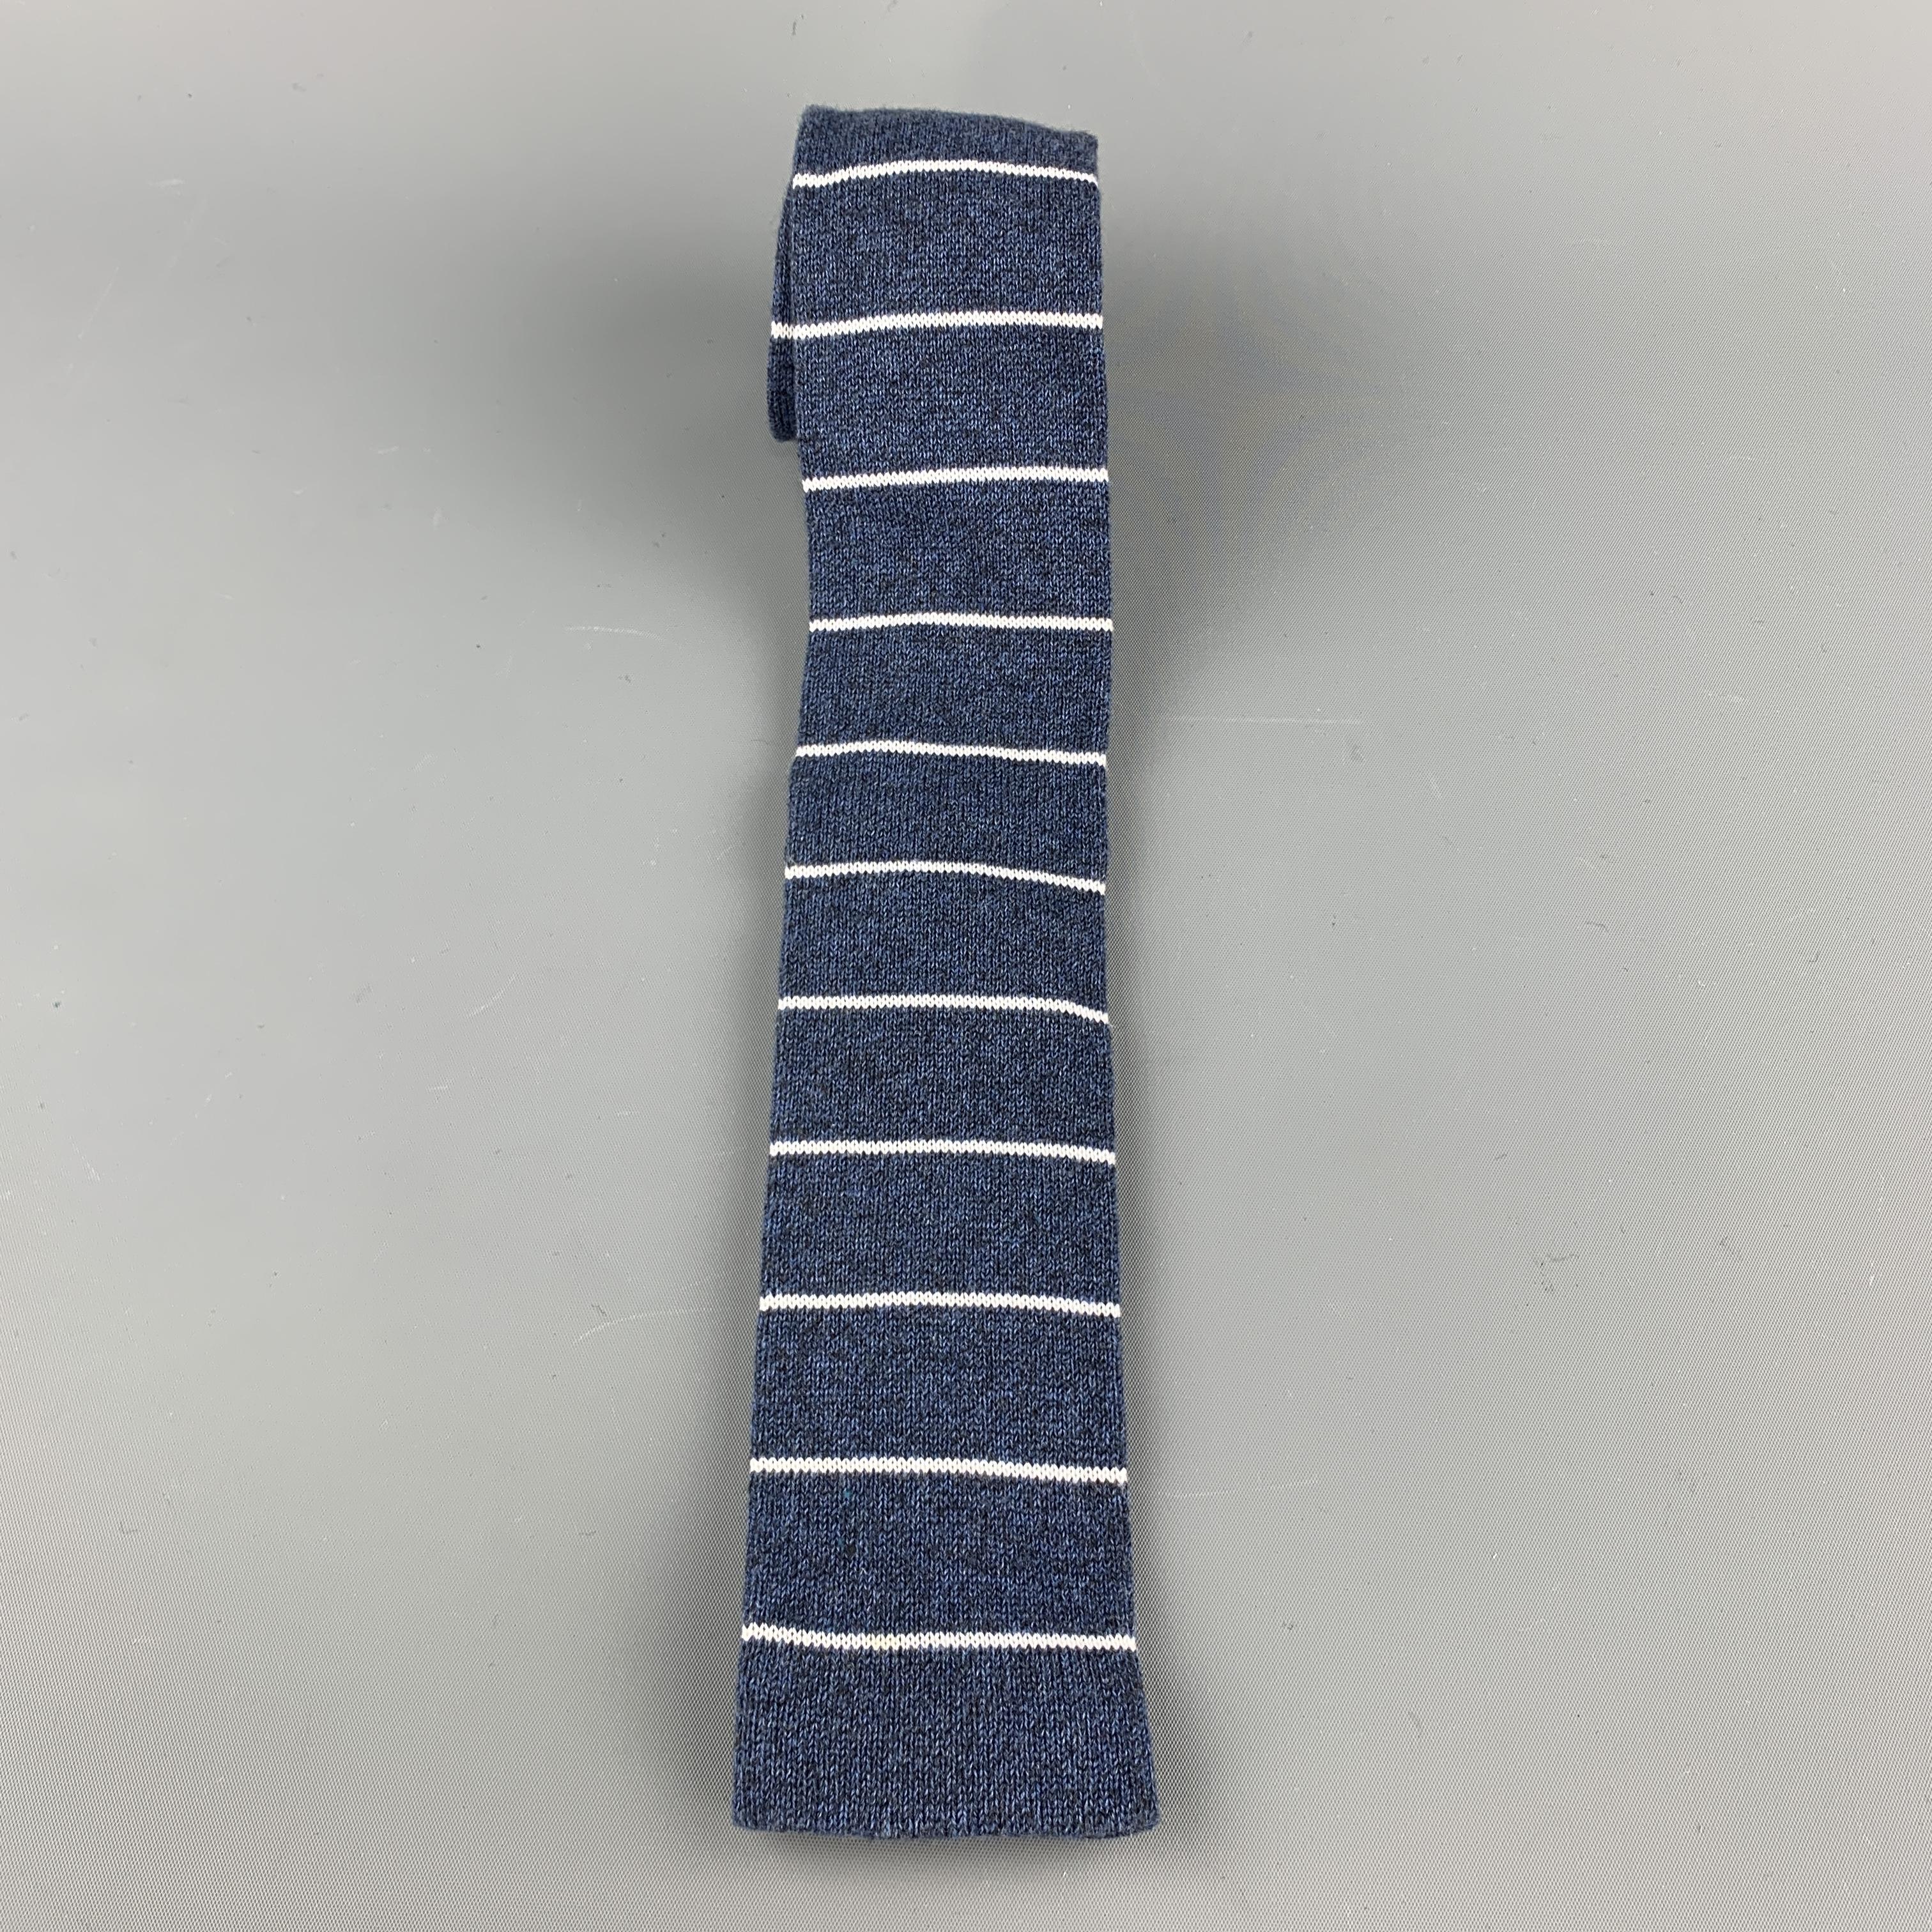 FIL D'ECOSSE necktie comes in blue cotton knit with squared tip and all over stripe print. Made in Italy.

Excellent Pre-Owned Condition.

Width: 2.5 in.